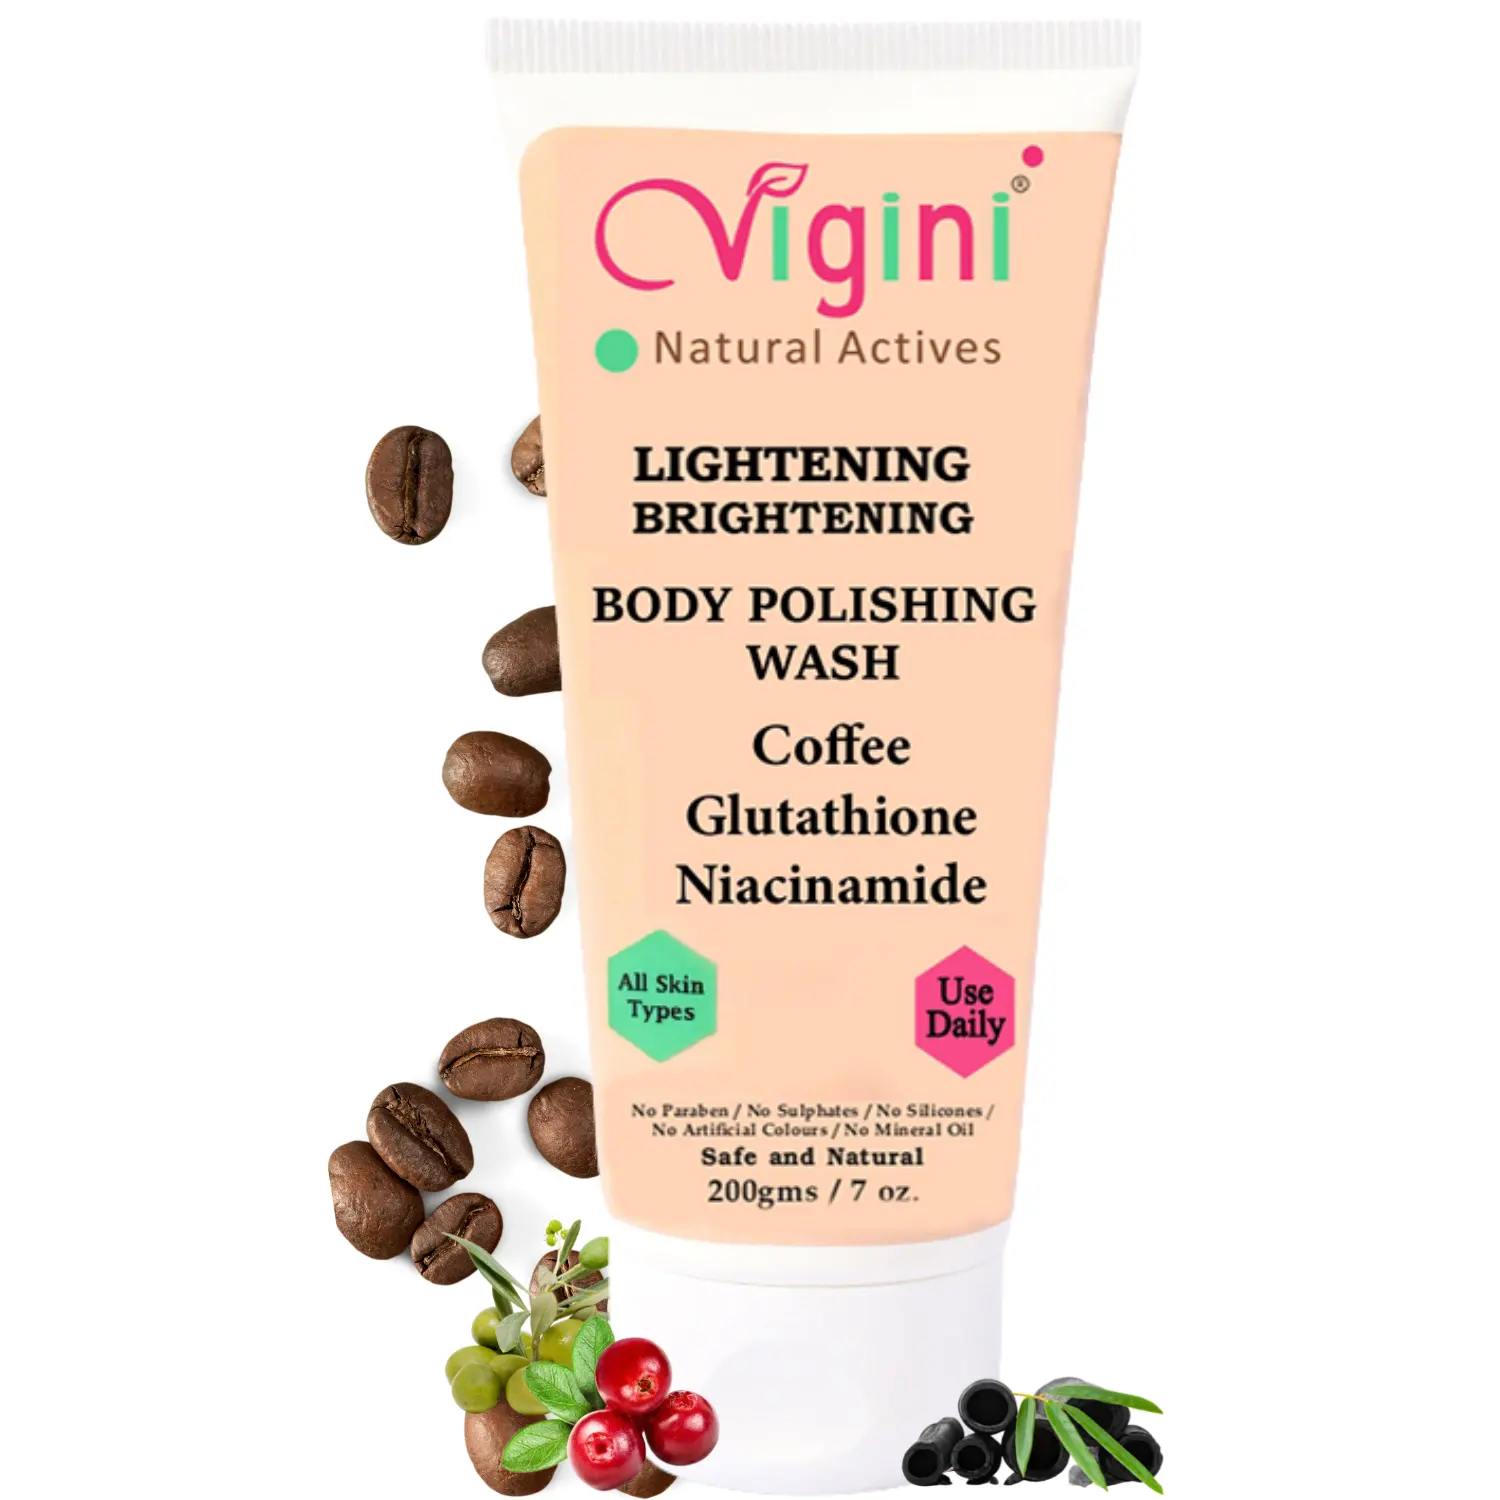 Hot Sale Lightening Brightening Body Polishing Wash Shower Gel Helps to Reduce Spot and Marks from Indian Exporter